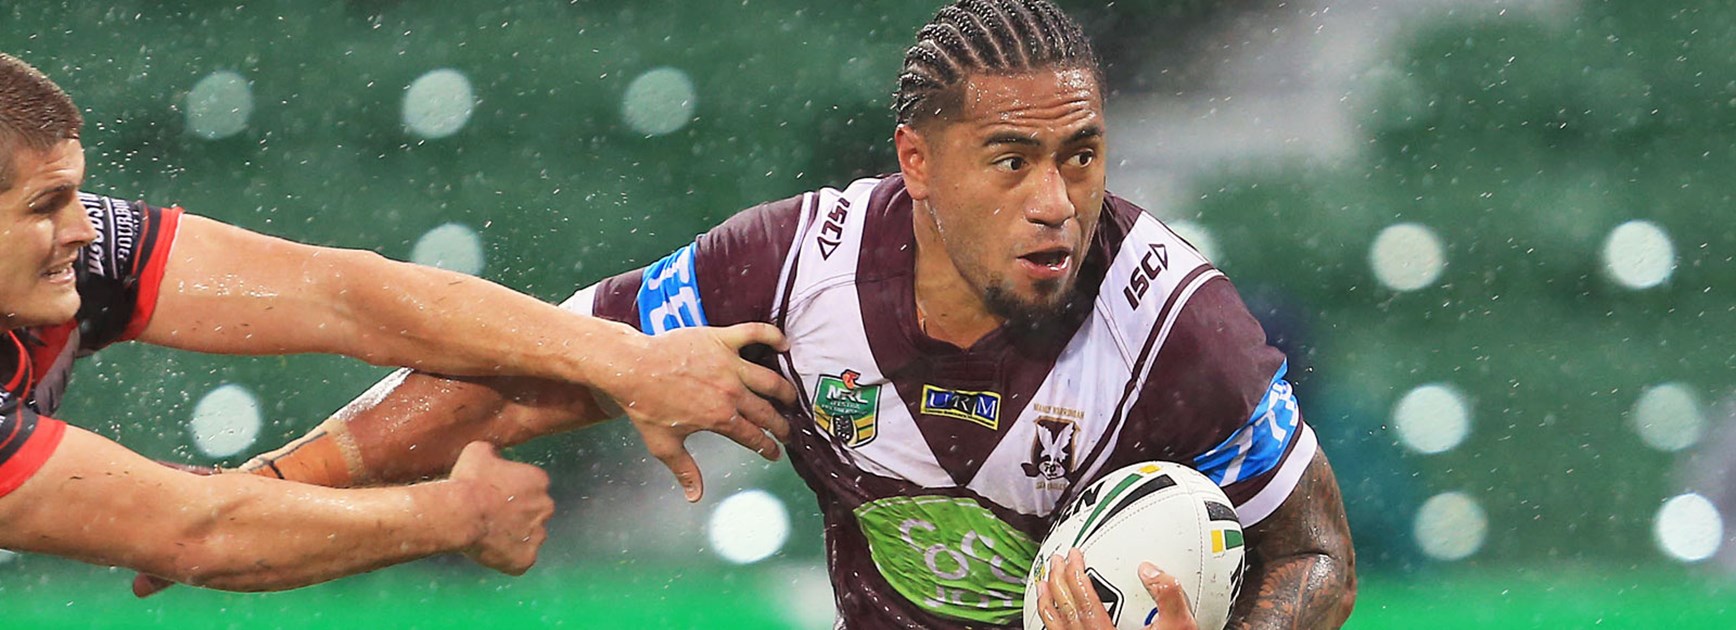 Manly winger Jorge Taufua has been playing with an arm injury.